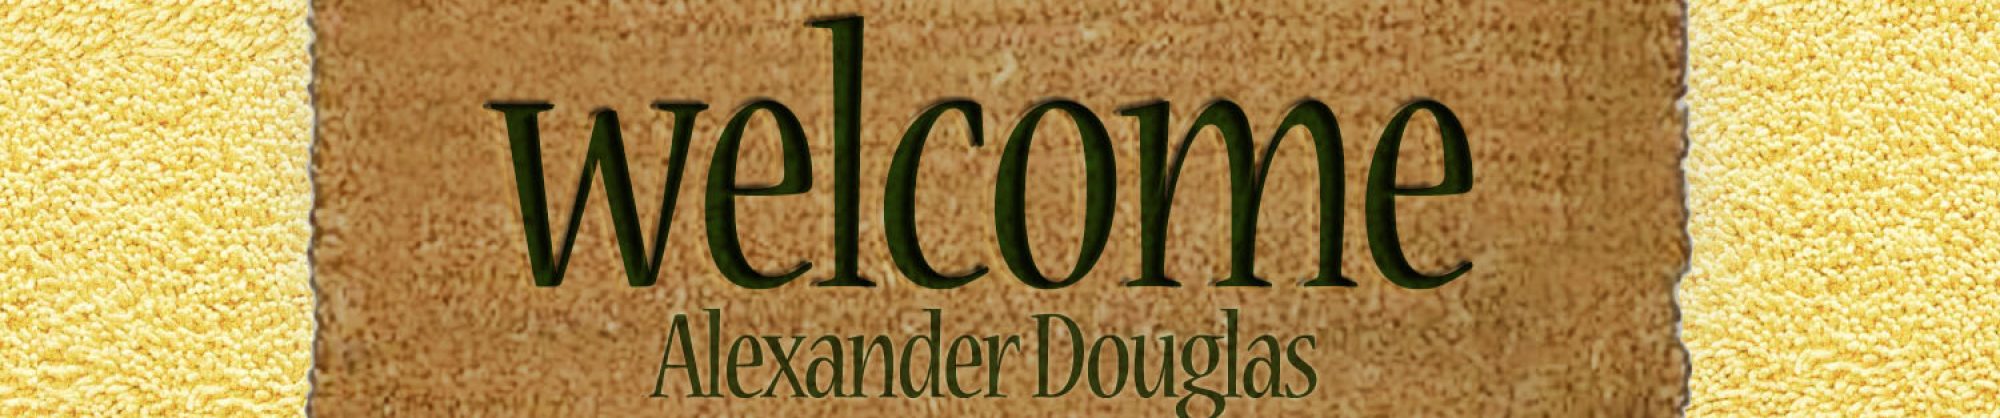 Alexander Douglas – a writer of words and music